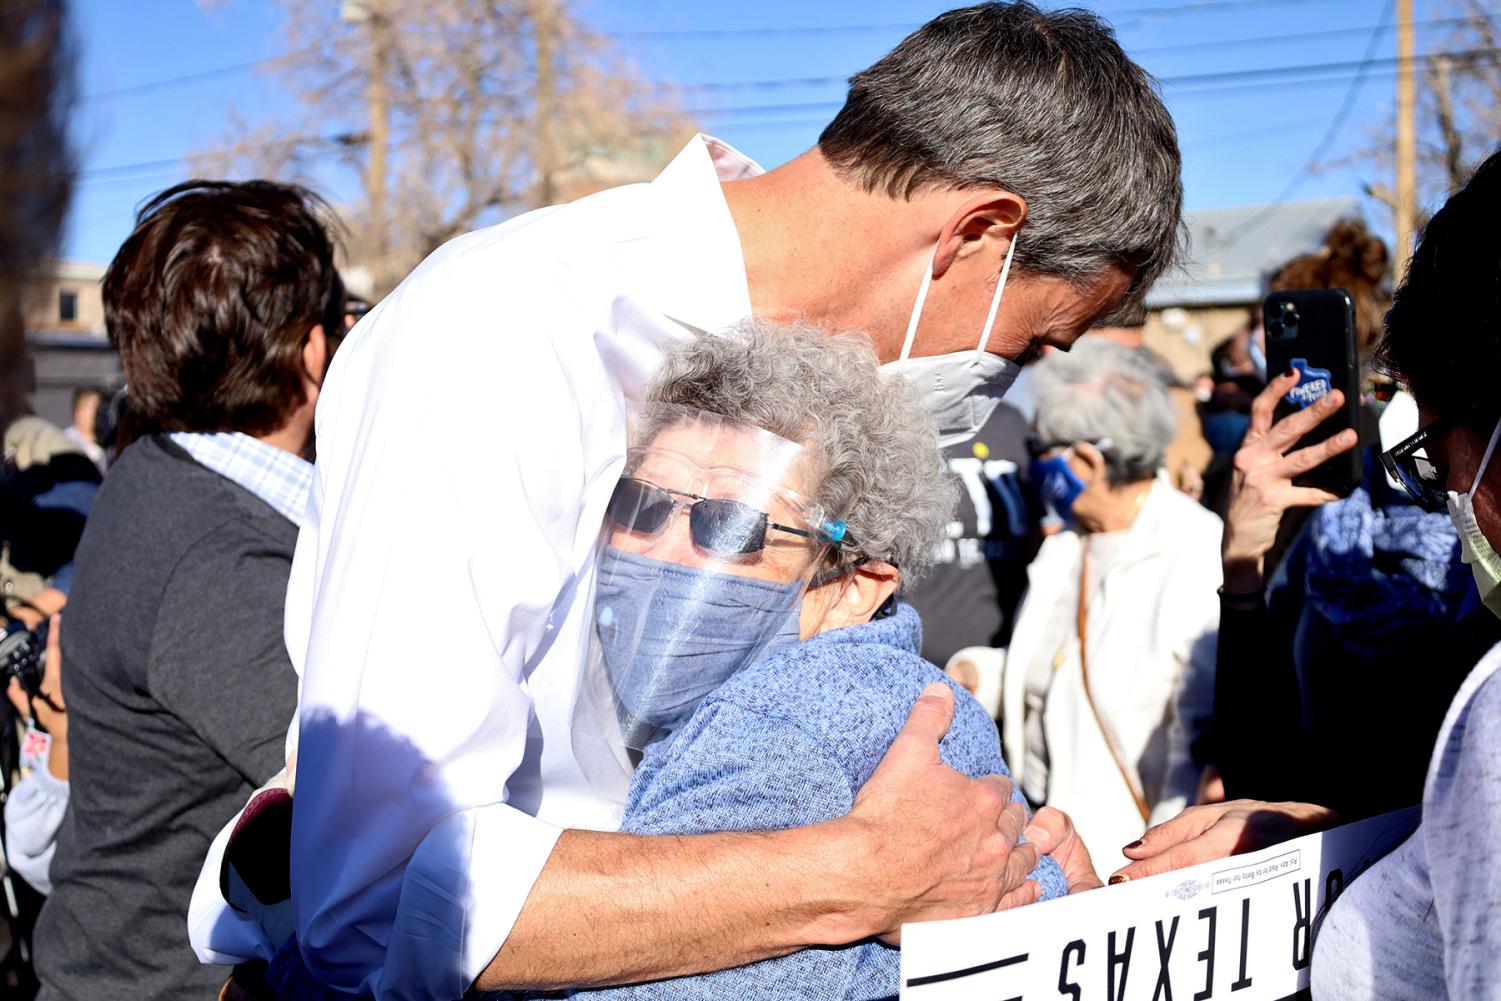 Beto+returns+to+El+Paso+in+hopes+of+gathering+local+support